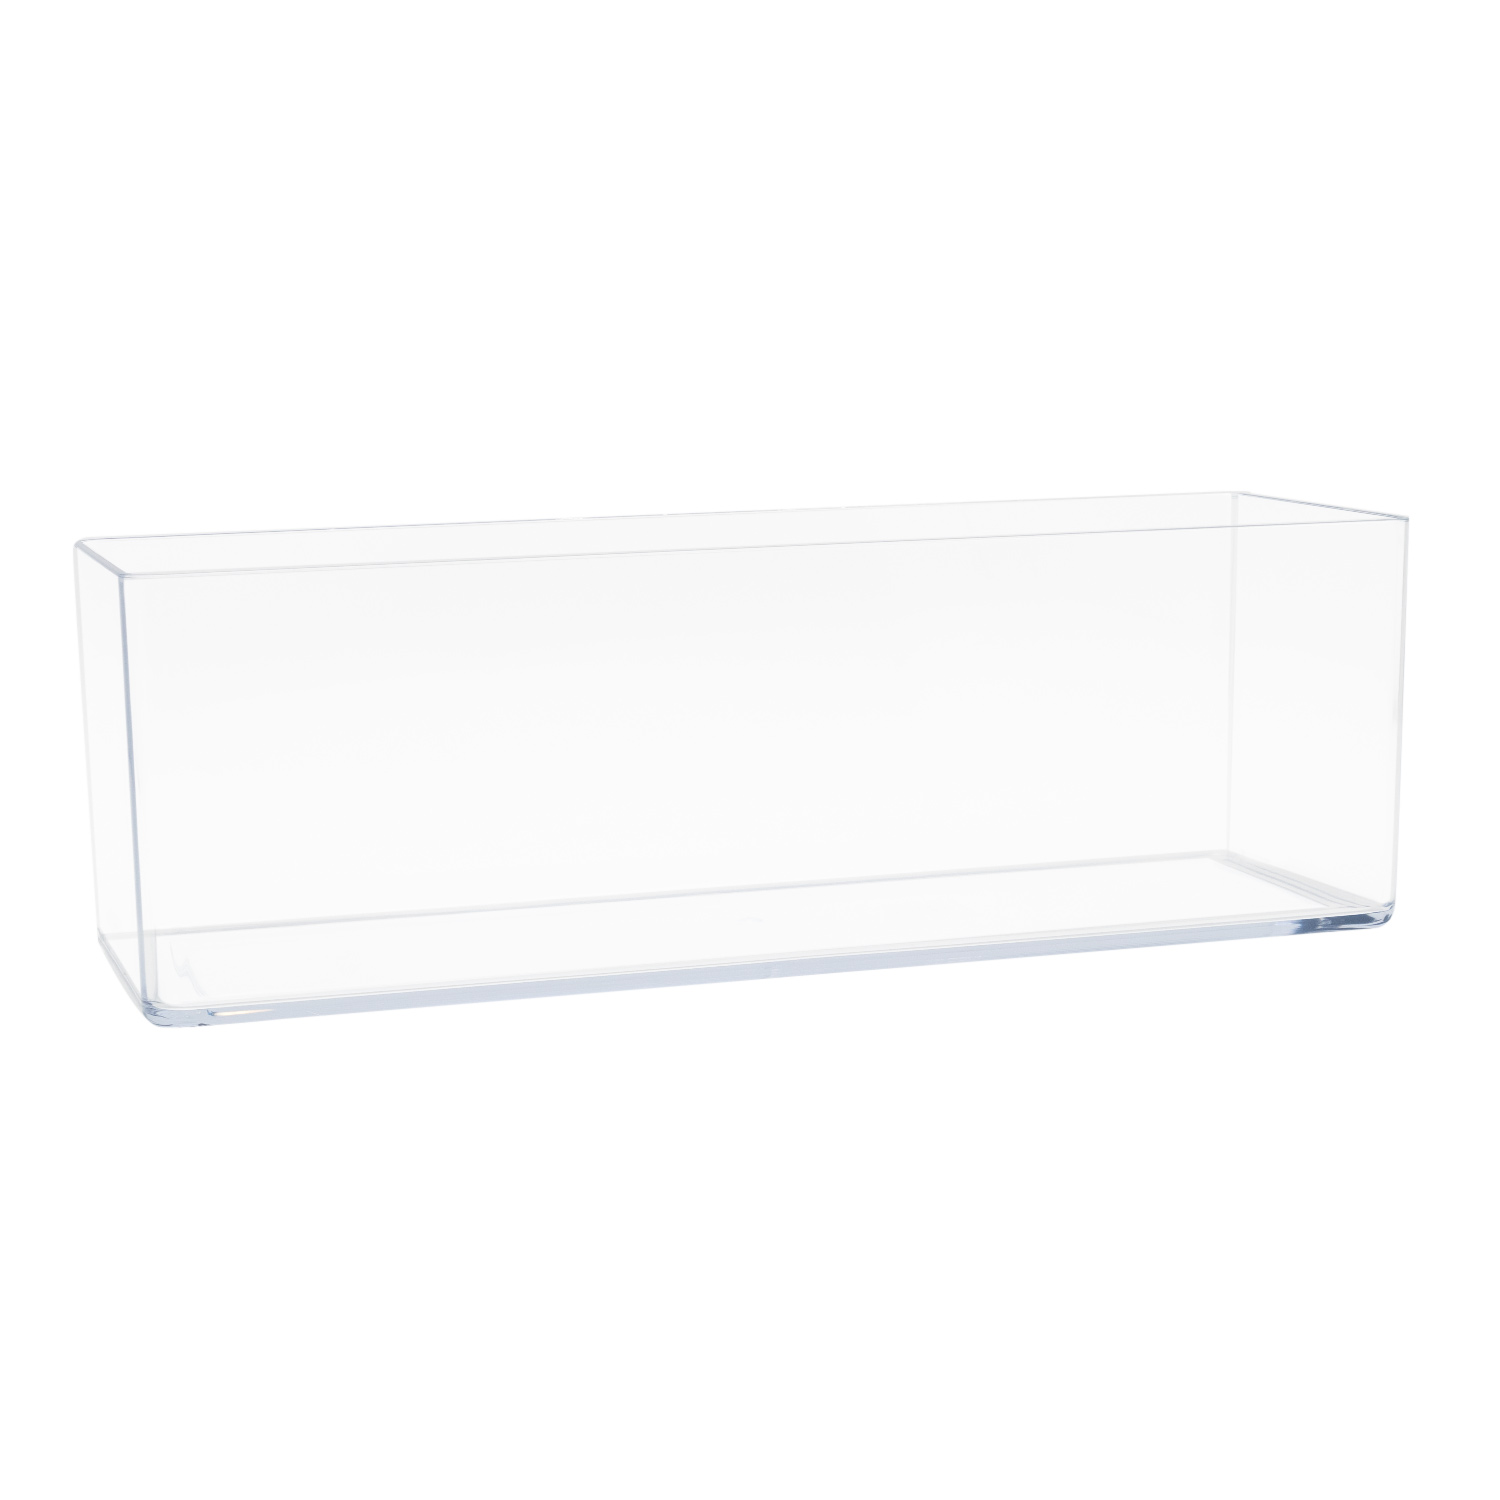 Acrylic Rectangle Flower Vase, 4 x 12, Low Square - Fisch Floral